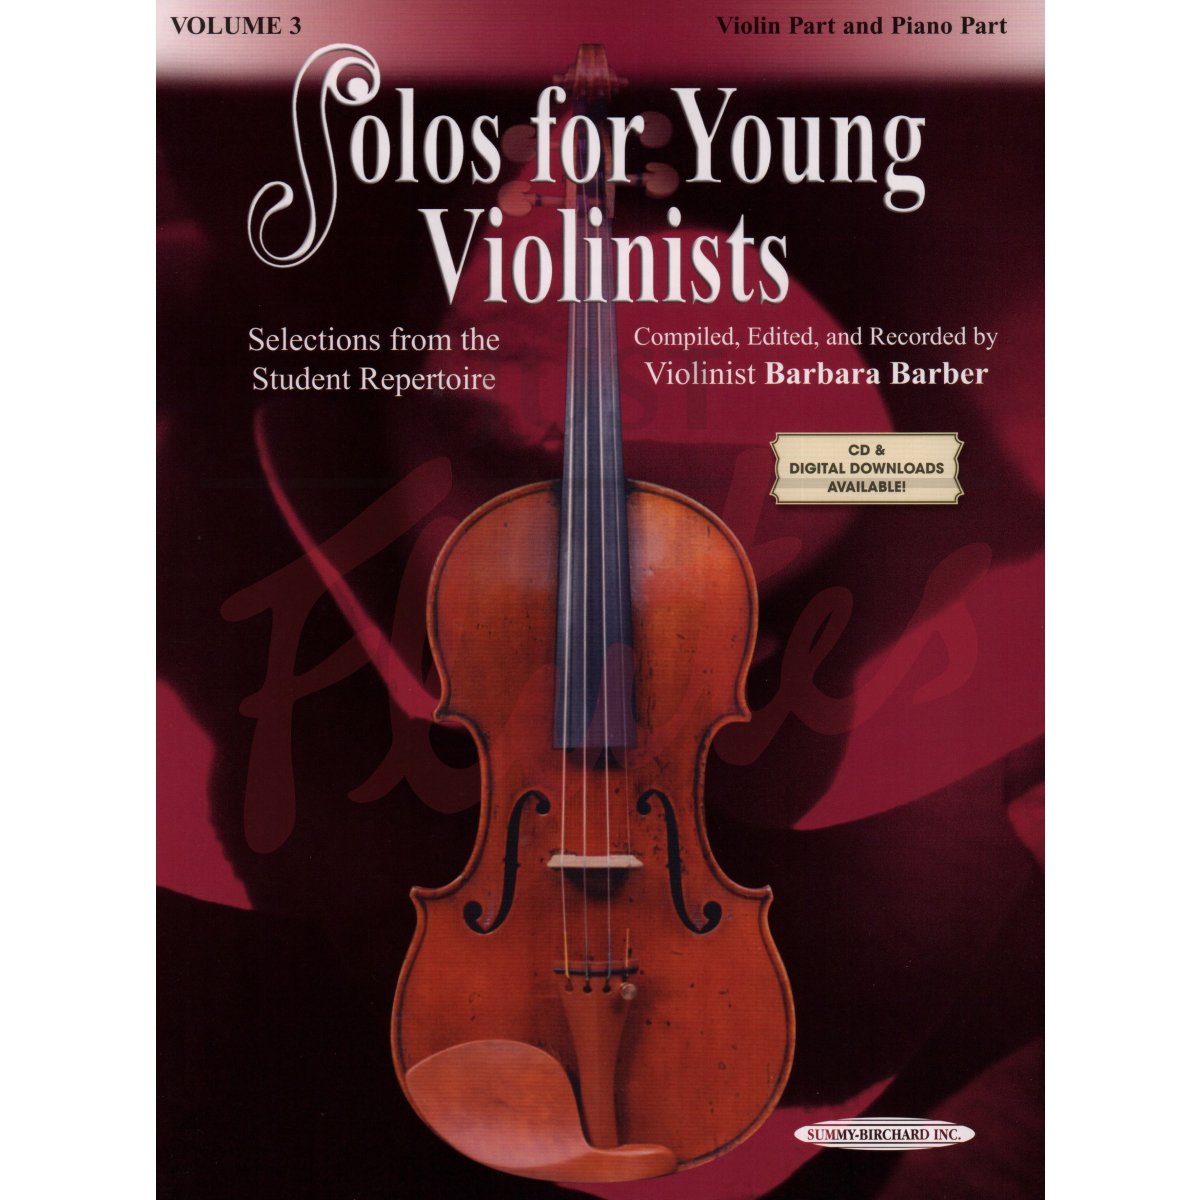 Solos For Young Violinists Vol 3